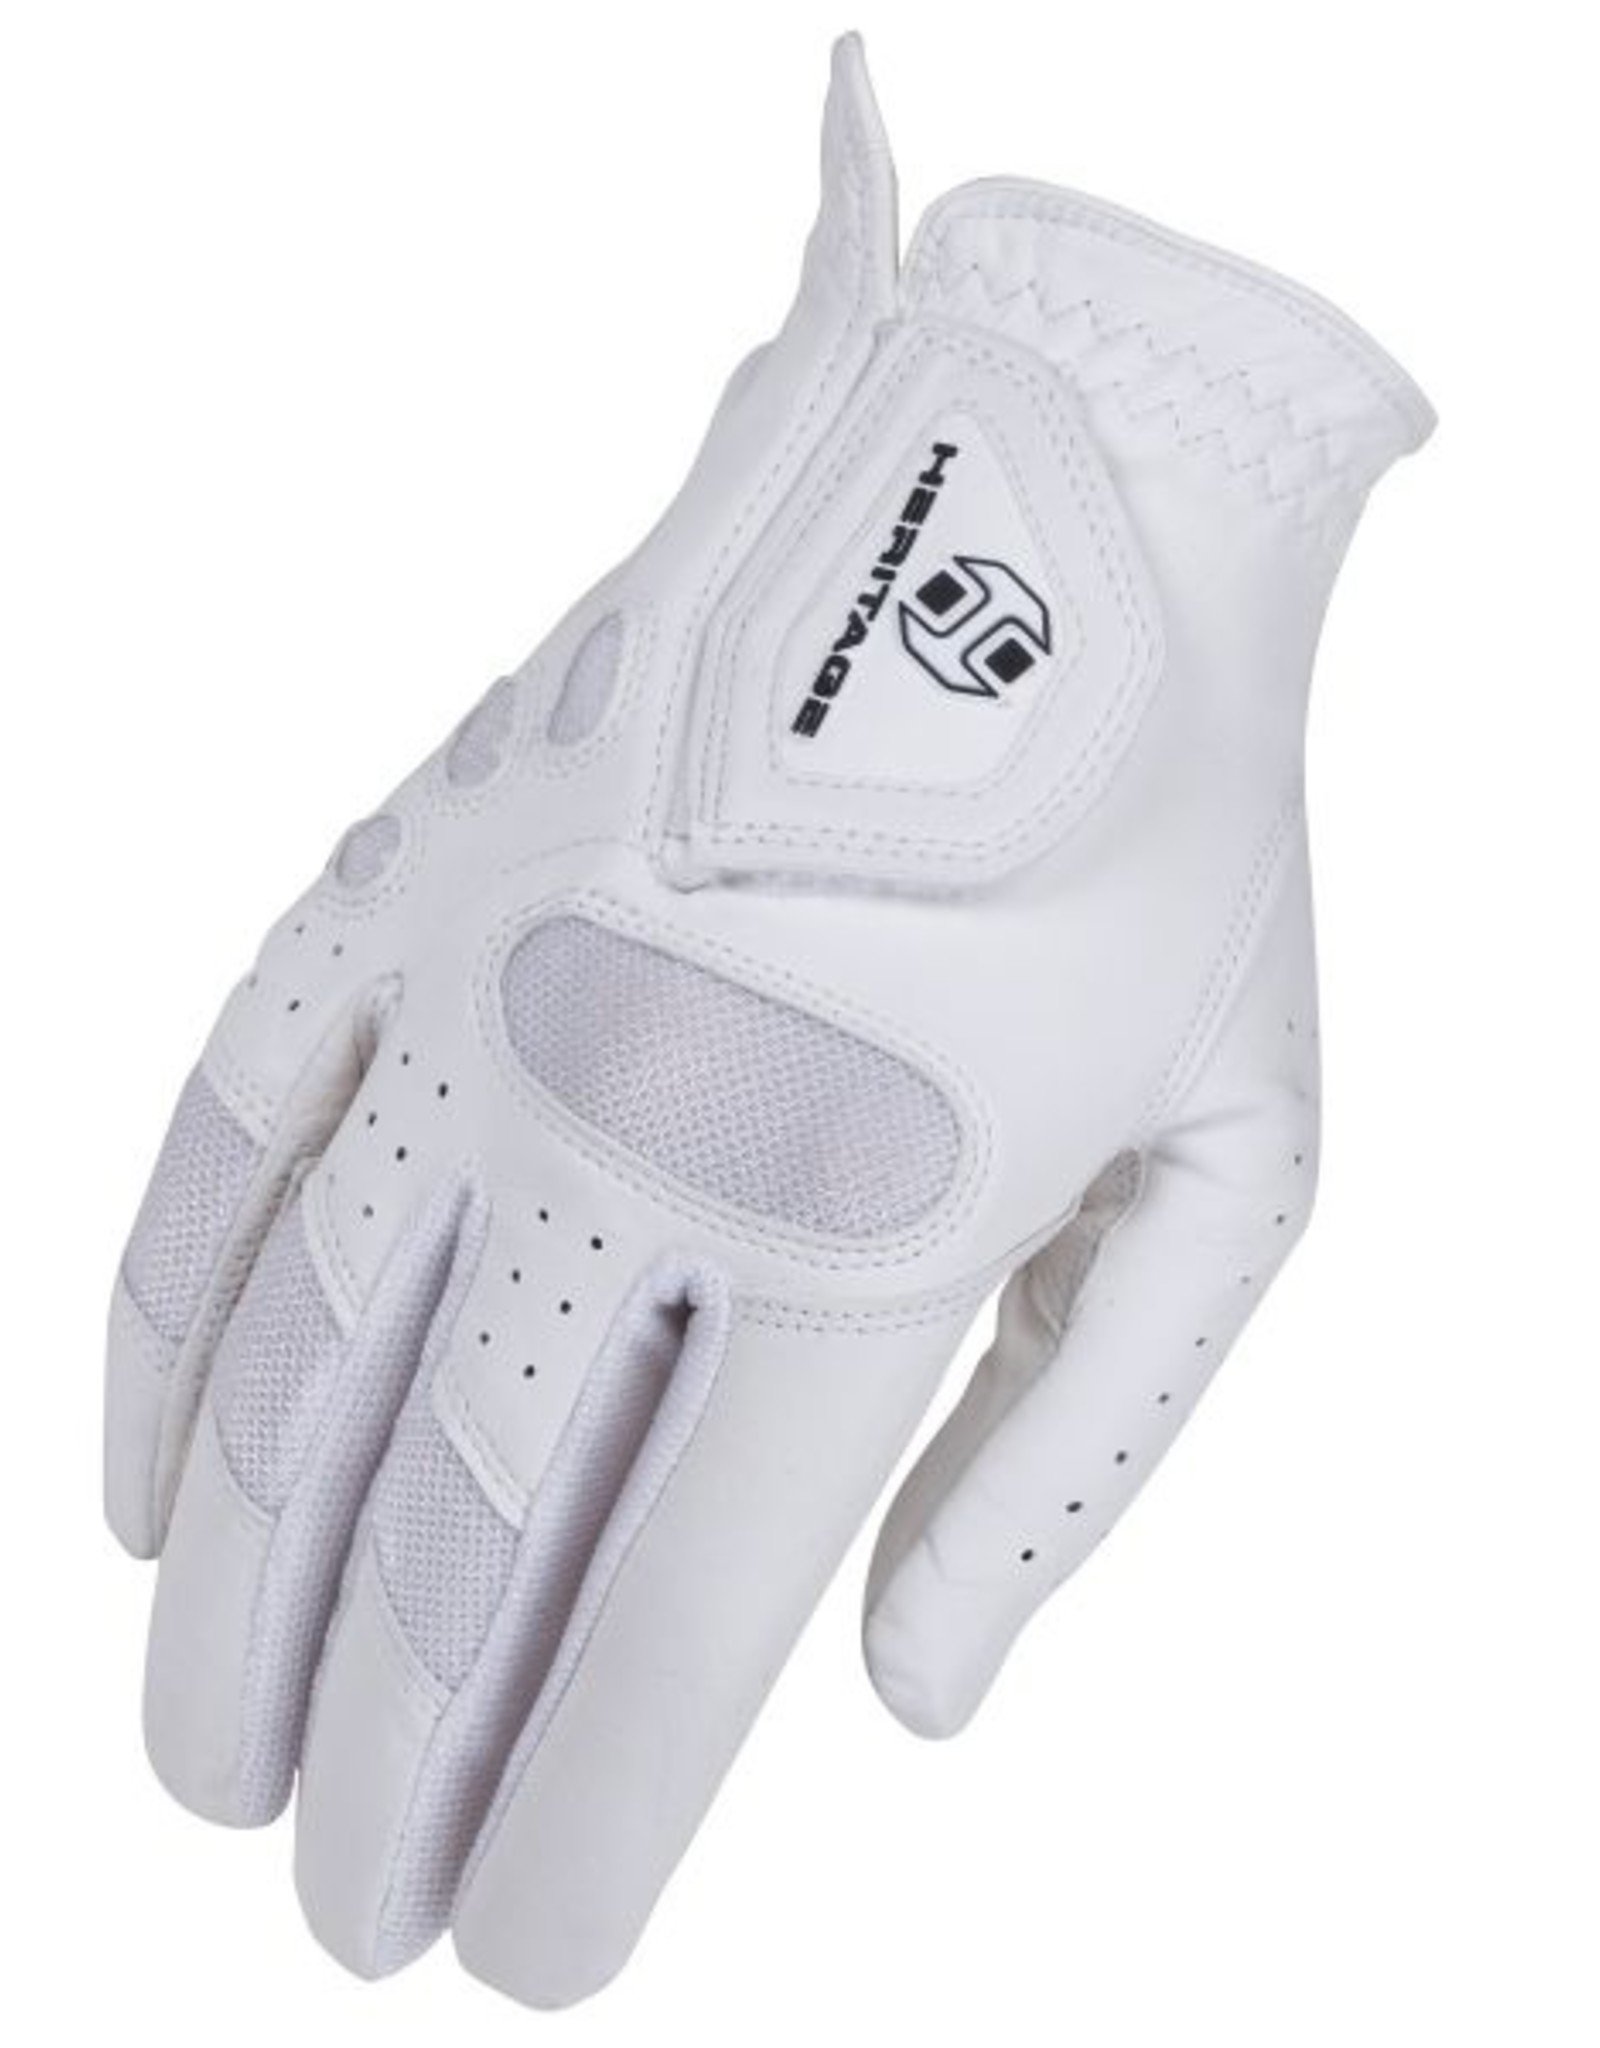 Heritage Tackified Pro-Air Show Gloves